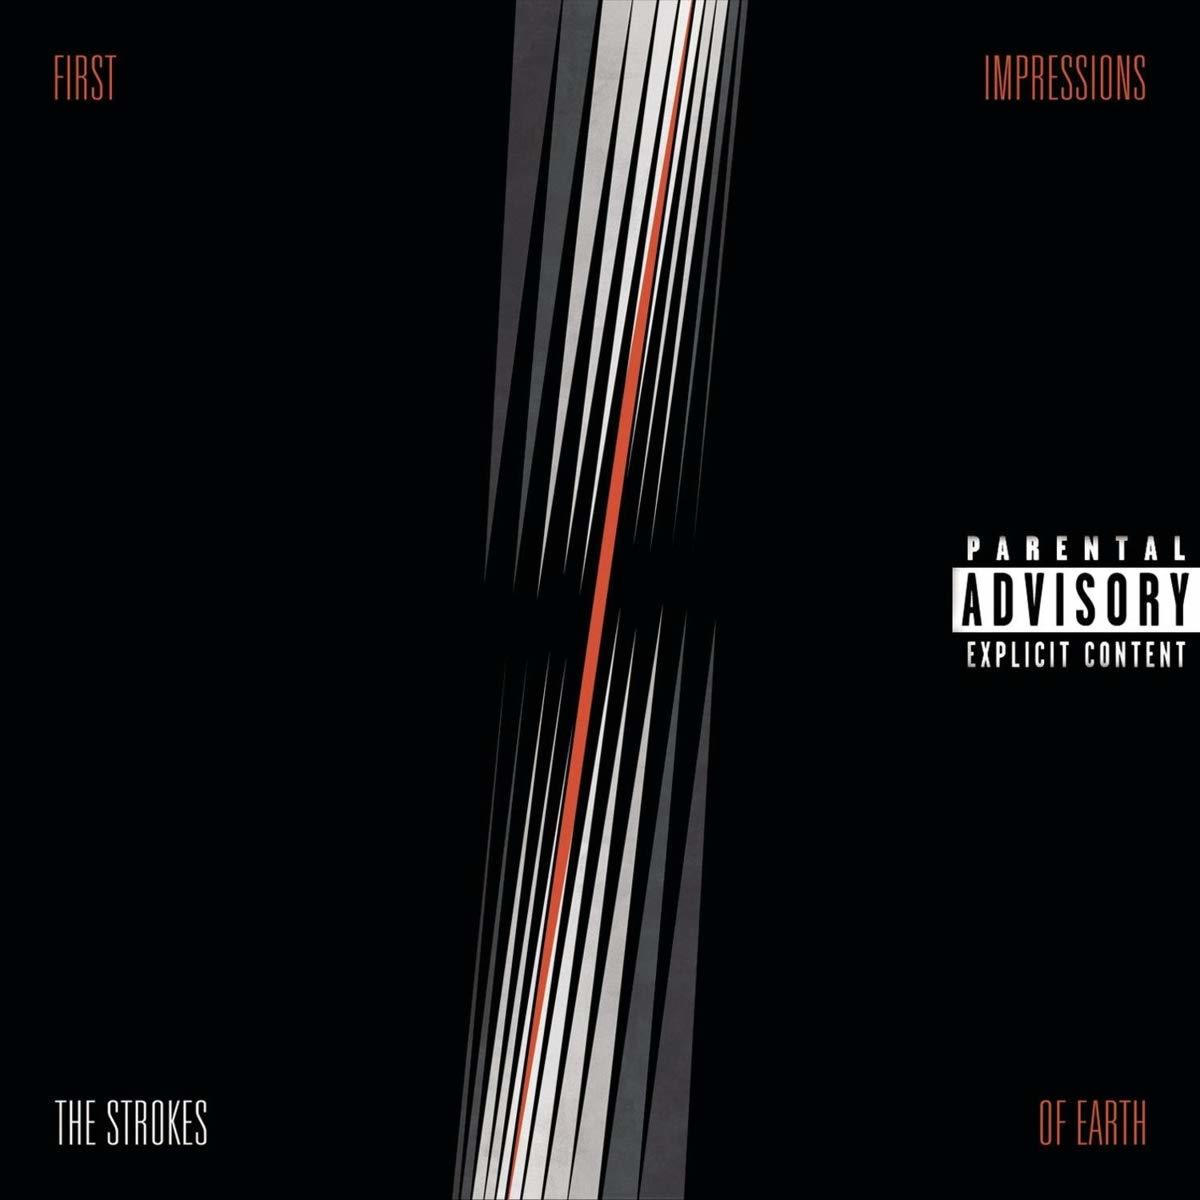 The Strokes - - Of First Earth Impressions (Vinyl)